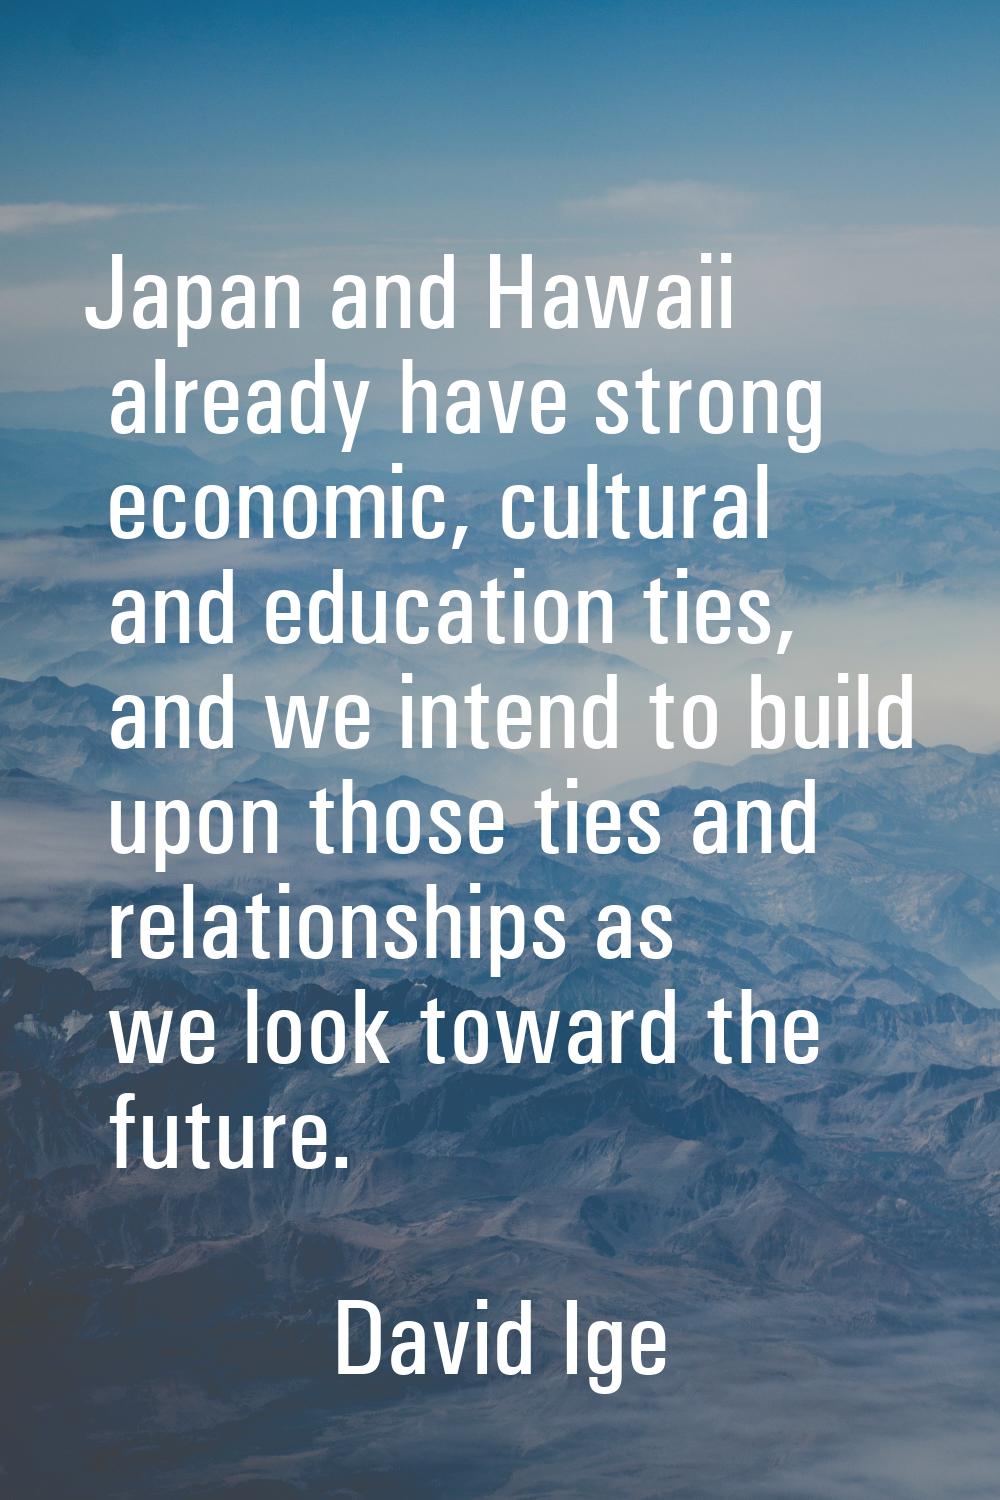 Japan and Hawaii already have strong economic, cultural and education ties, and we intend to build 